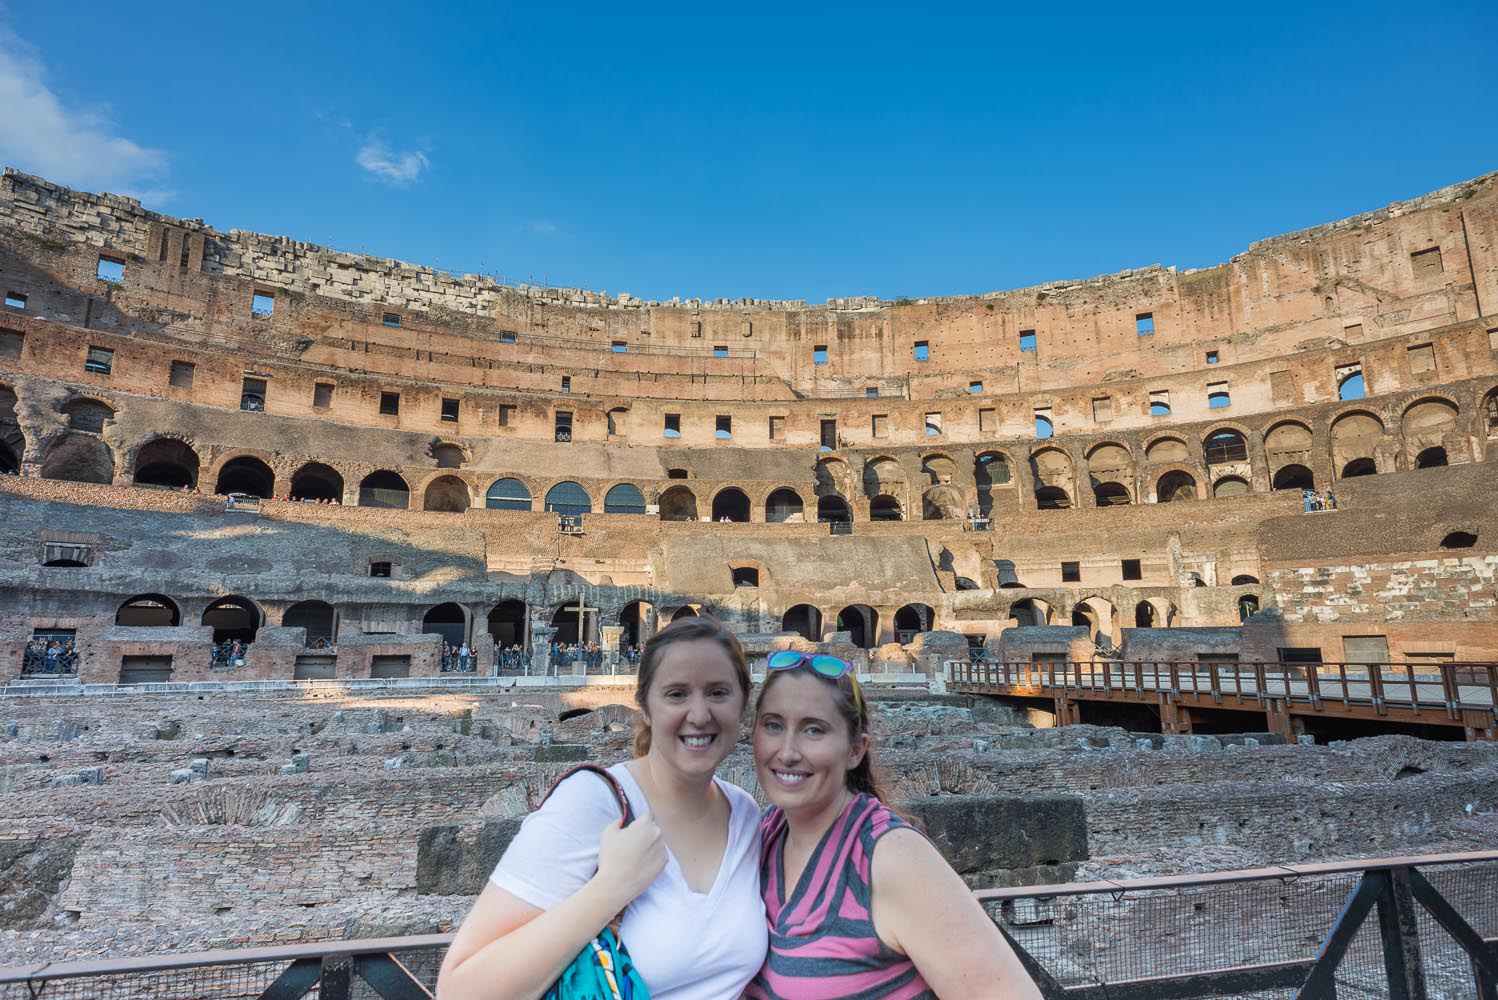 Alison and Kait in the Colosseum, Rome